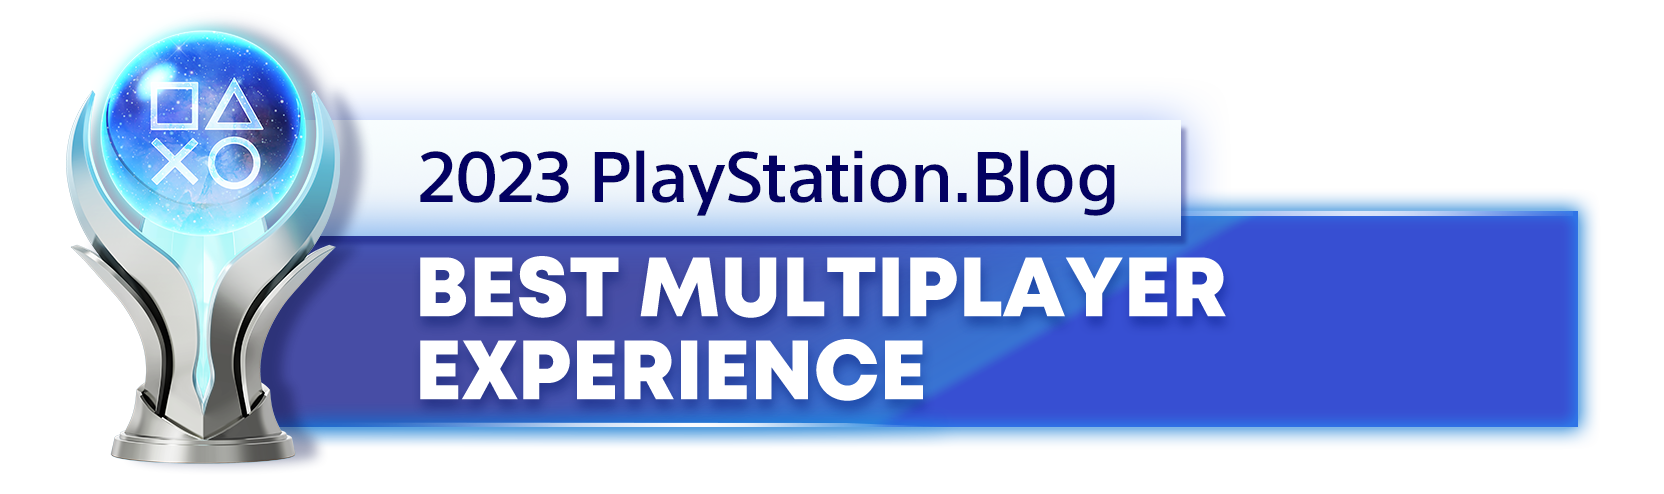  "Platinum Trophy for the 2023 PlayStation Blog Best Multiplayer Experience Winner"